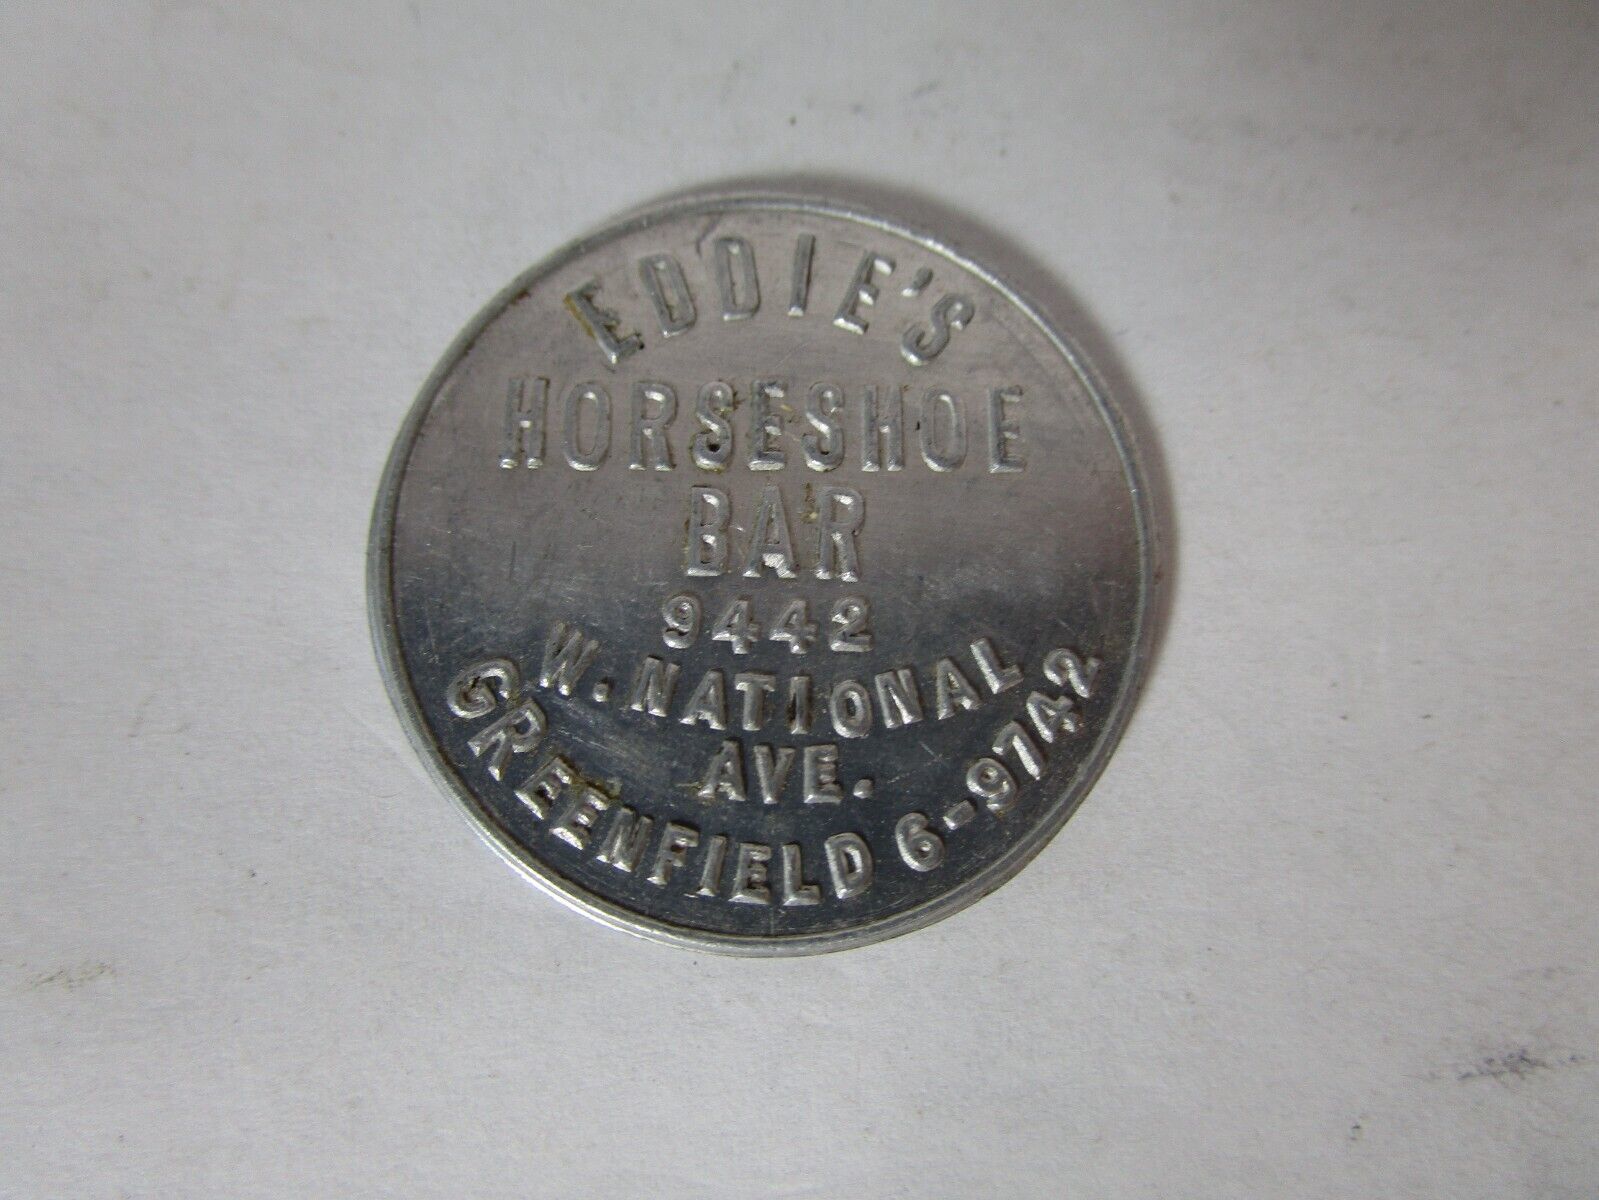 Primary image for Eddie's Horseshoe Bar Token Good For 10c Trade 9442 W National Ave Greenfield WI